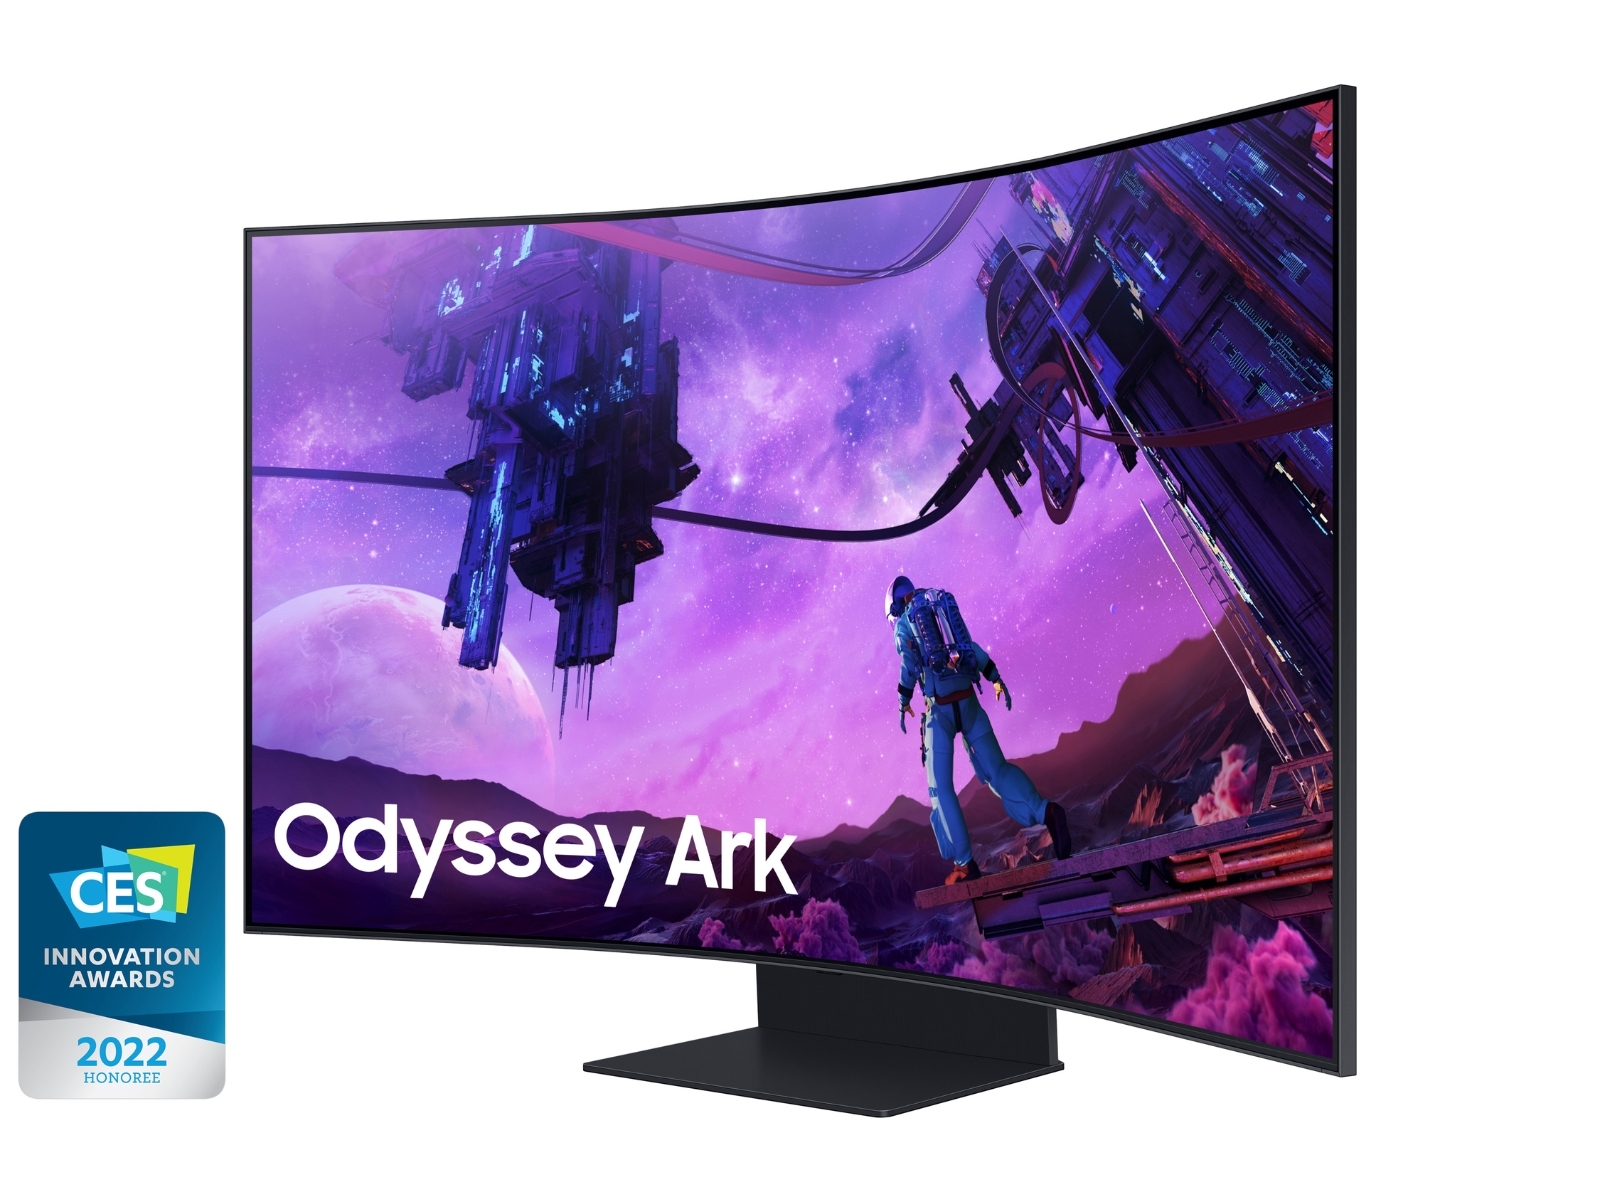 Samsung's $3,499 Odyssey Ark gaming monitor is a sight to behold